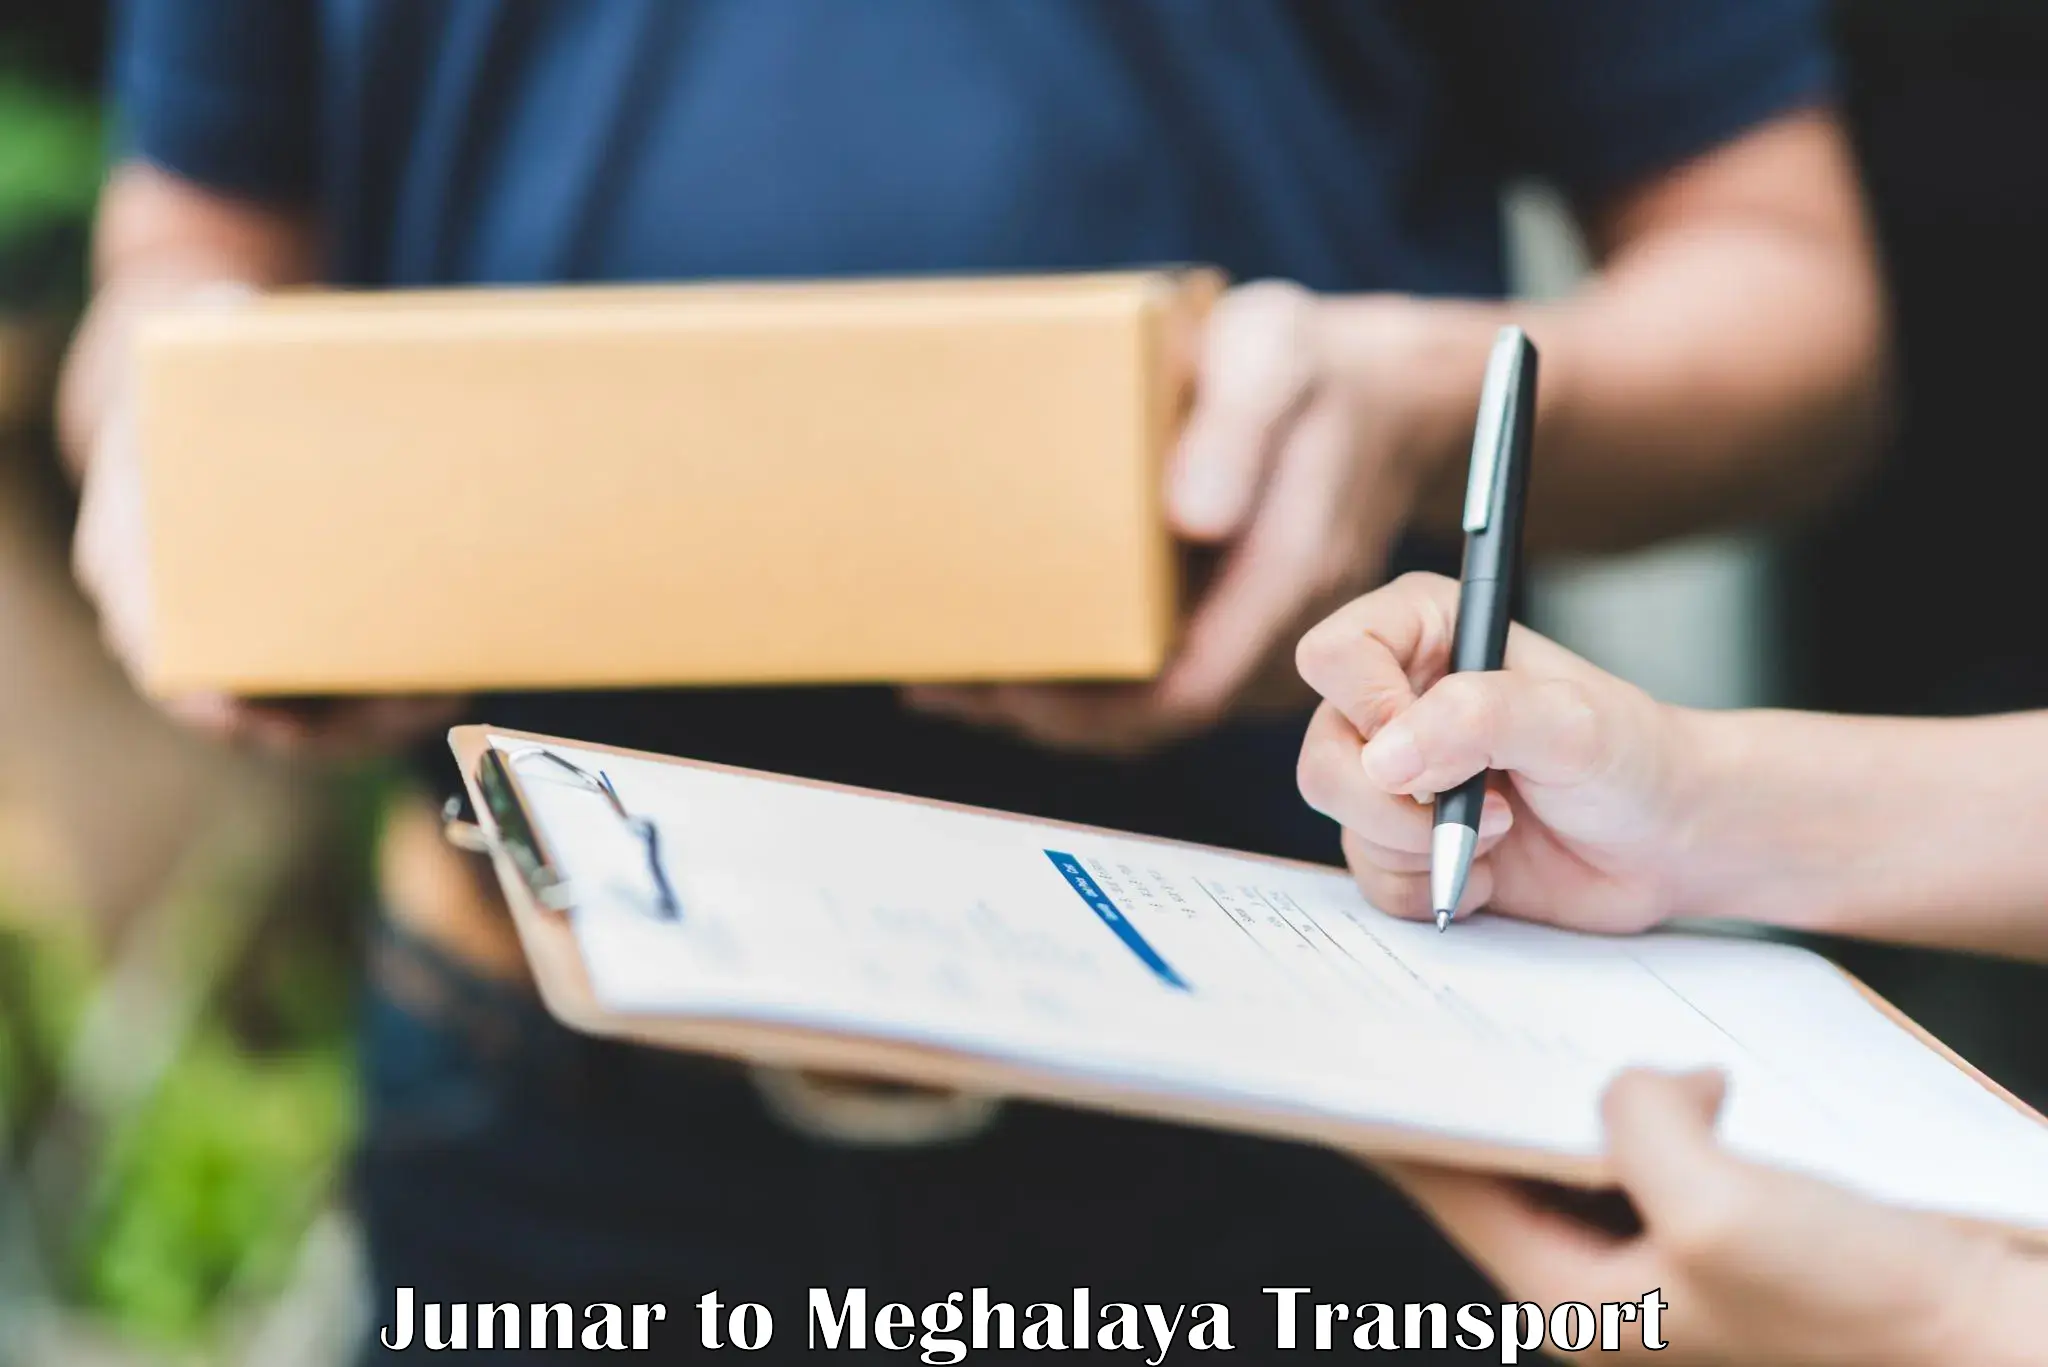 Nearby transport service Junnar to Meghalaya